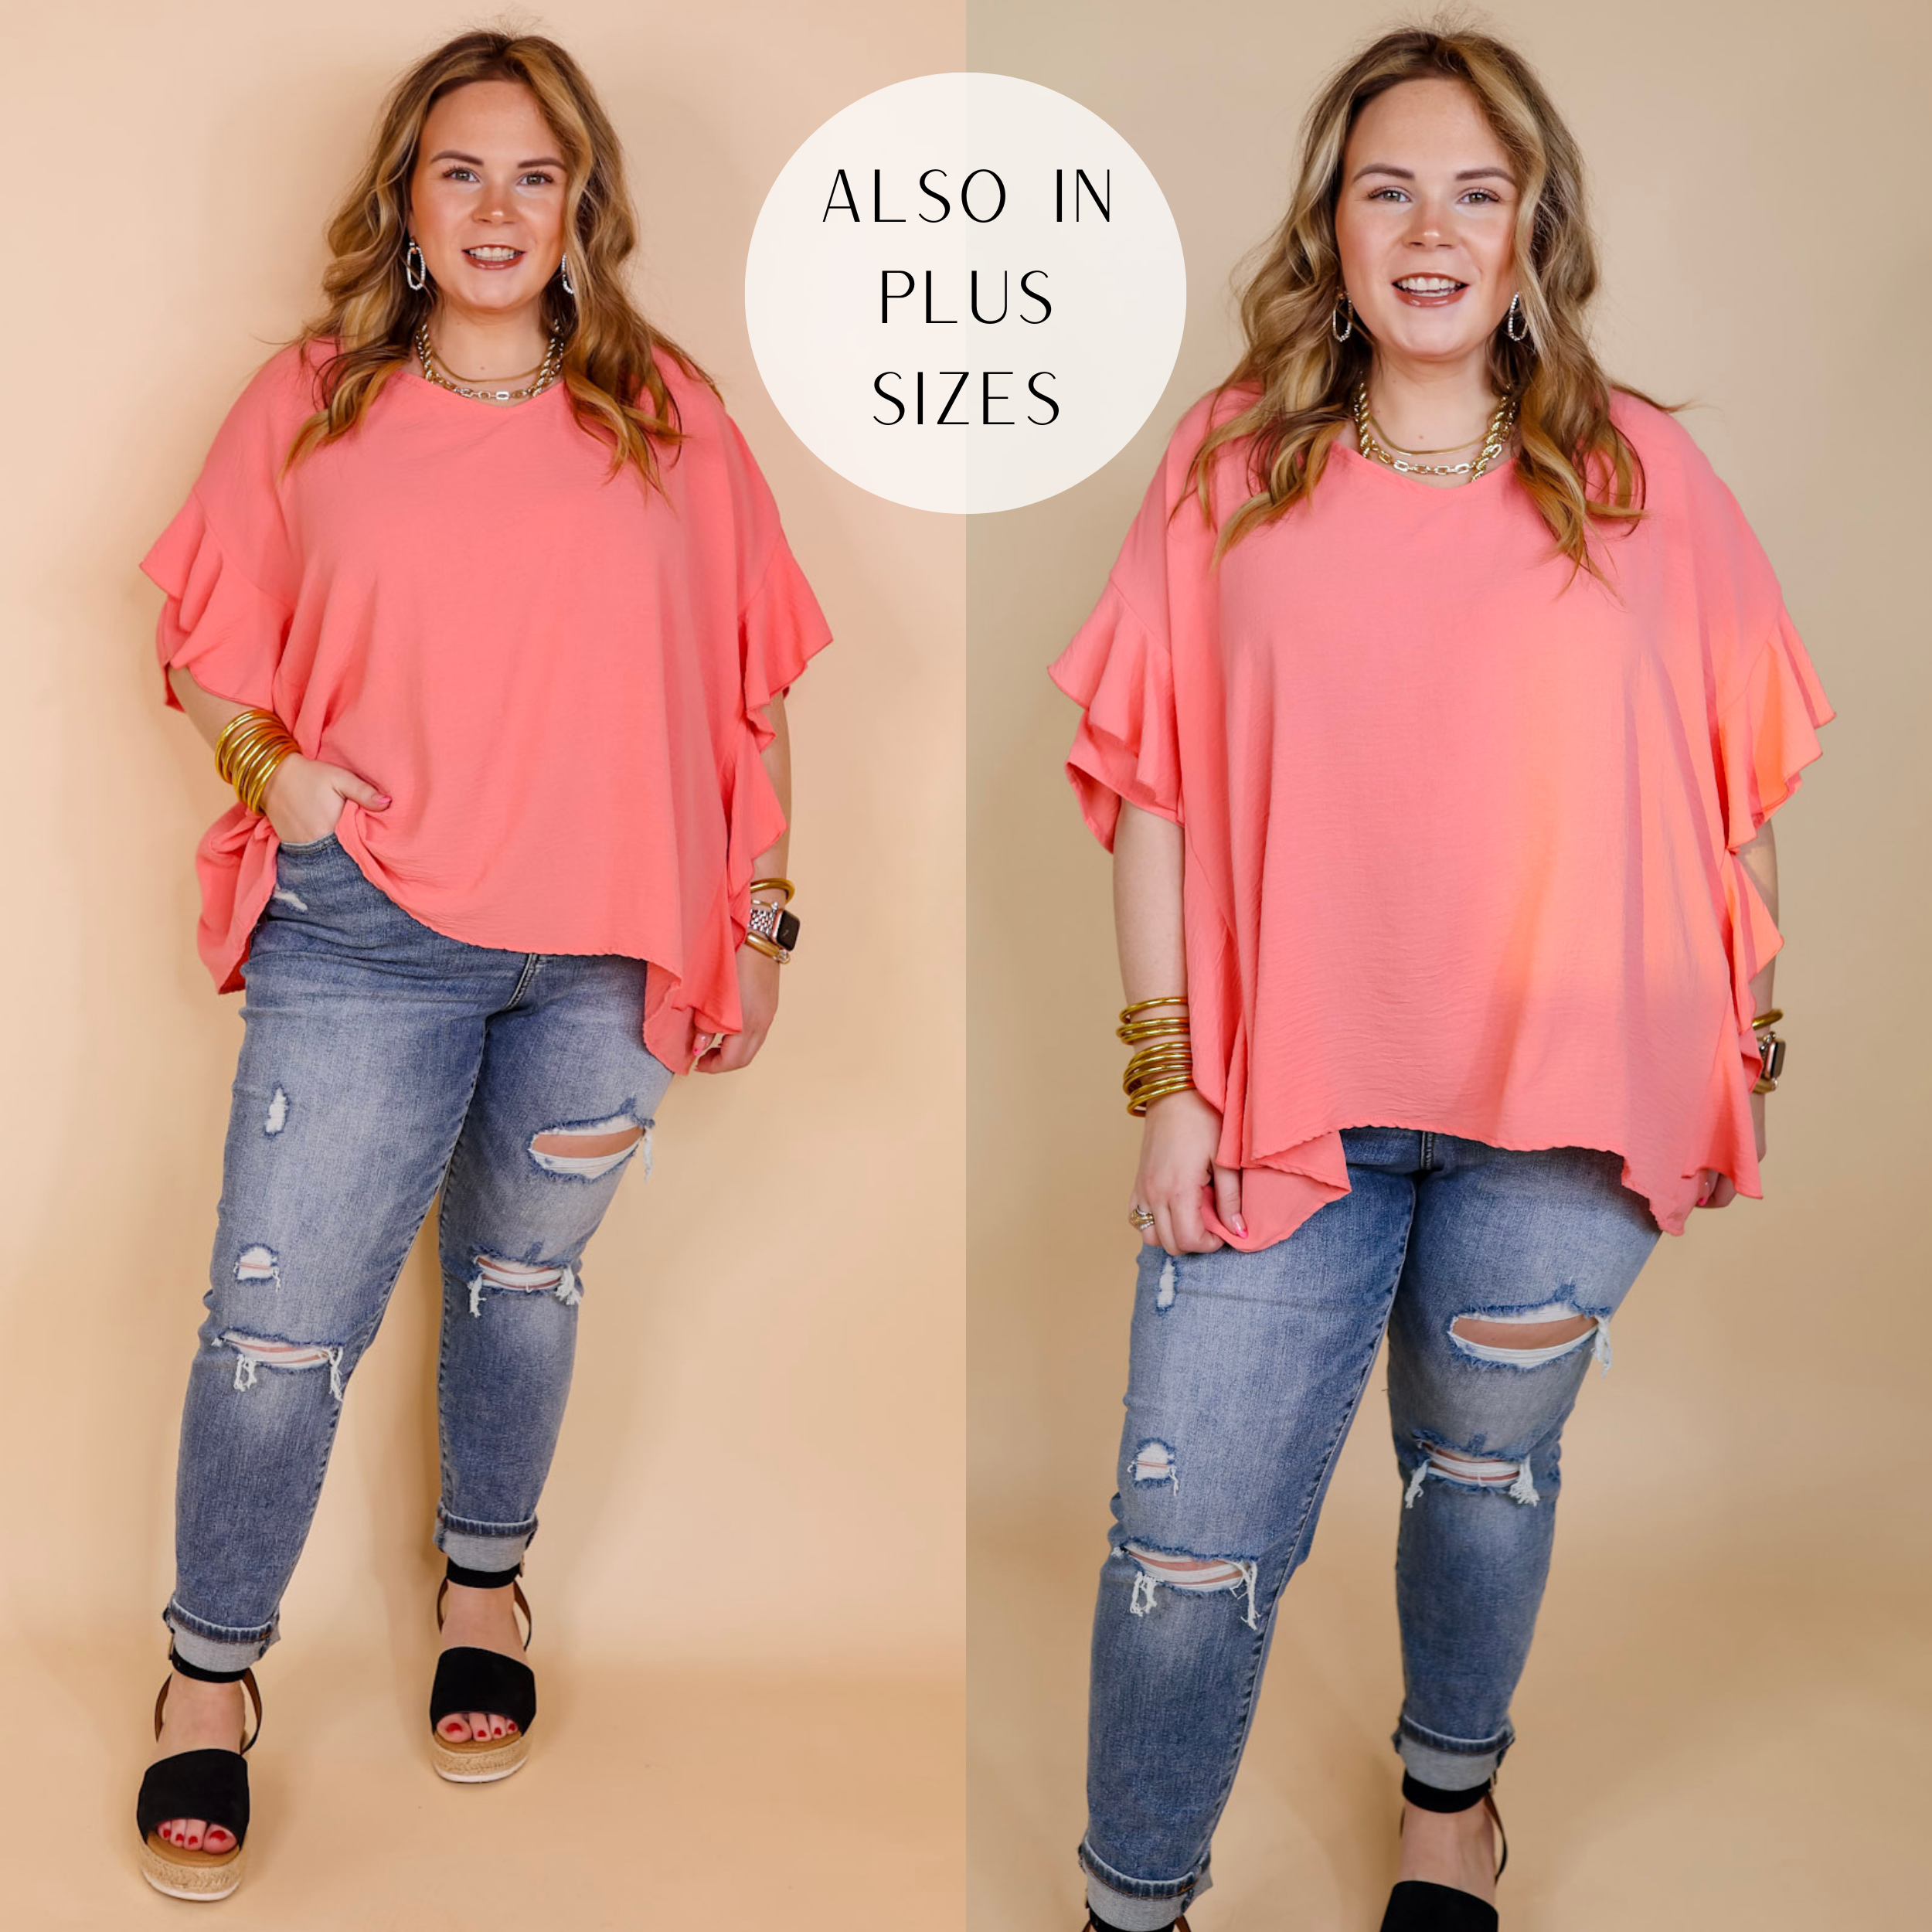 Model is wearing a coral pink poncho top with ruffle sleeves and ruffles down the side. Model has it paired with distressed skinny jeans, black sandals, and gold jewelry.